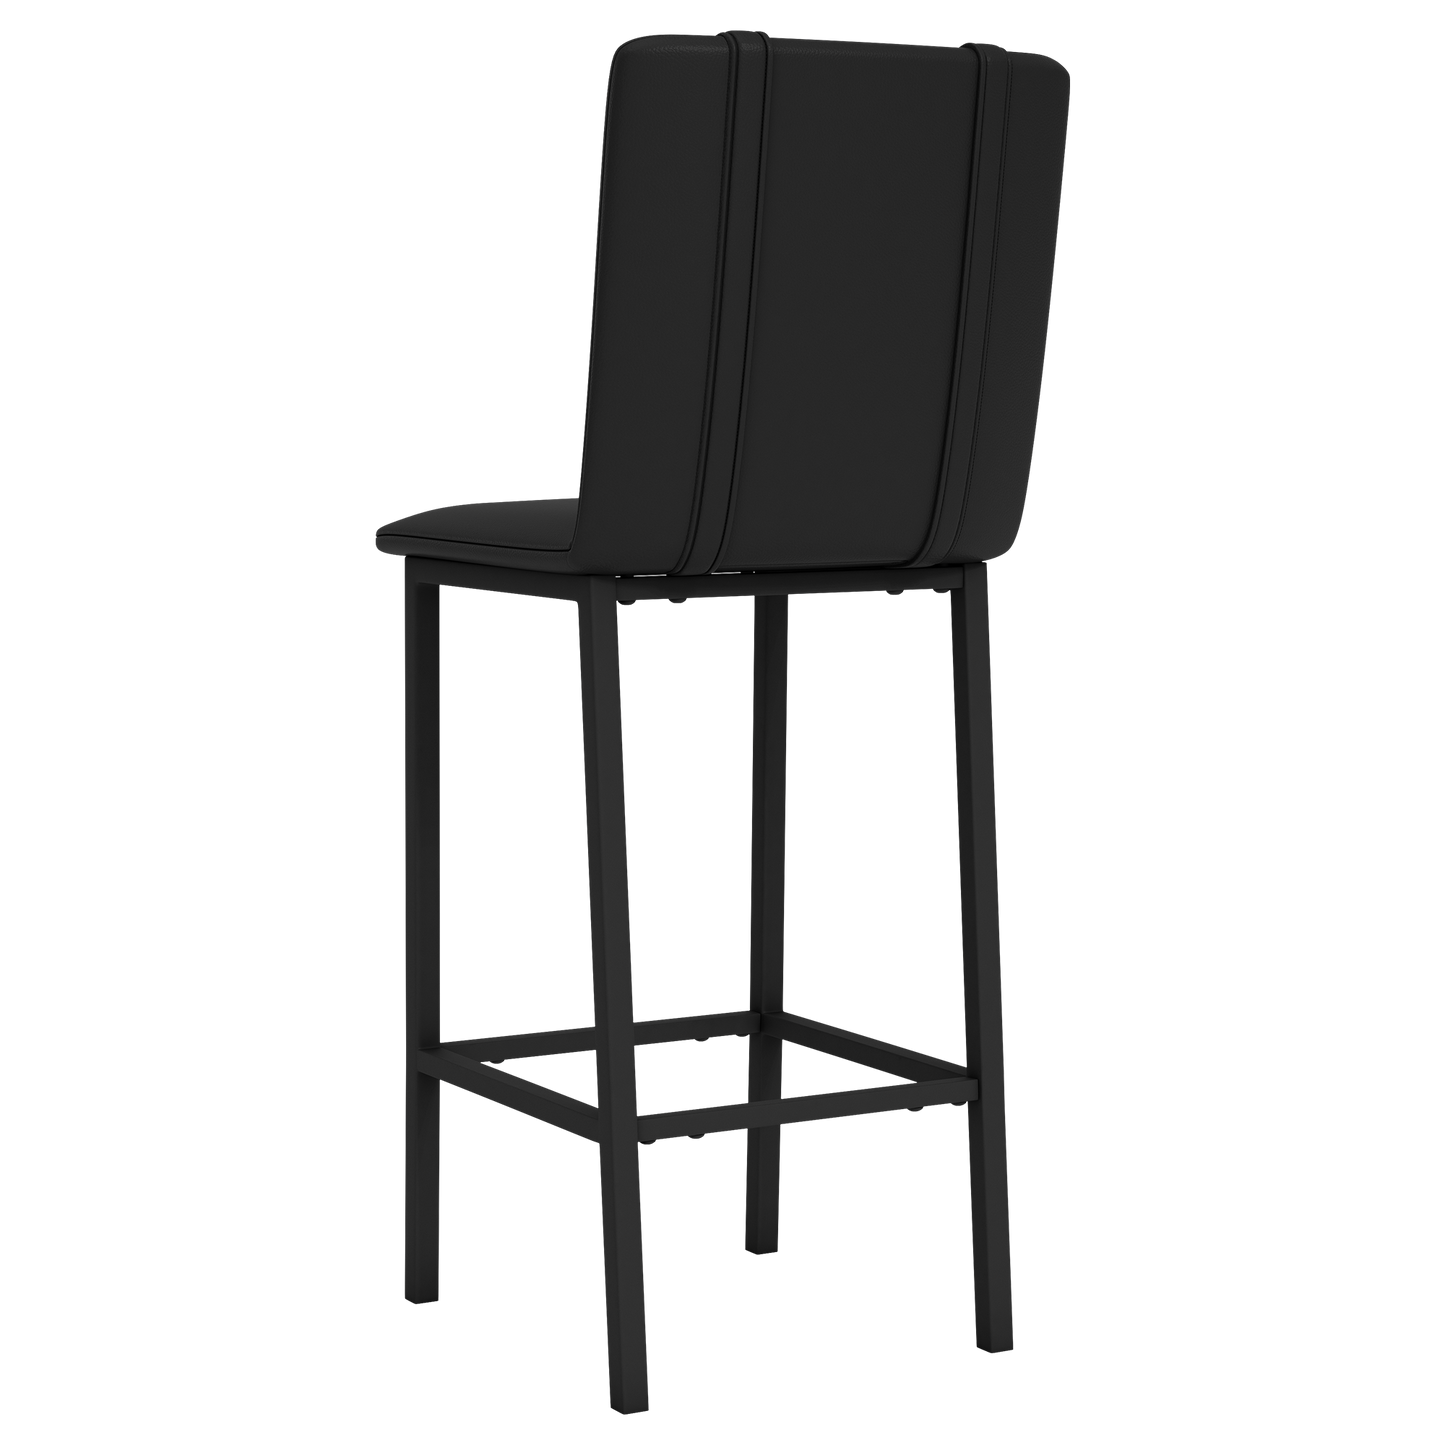 Bar Stool 500 with Detroit Tigers White Set of 2